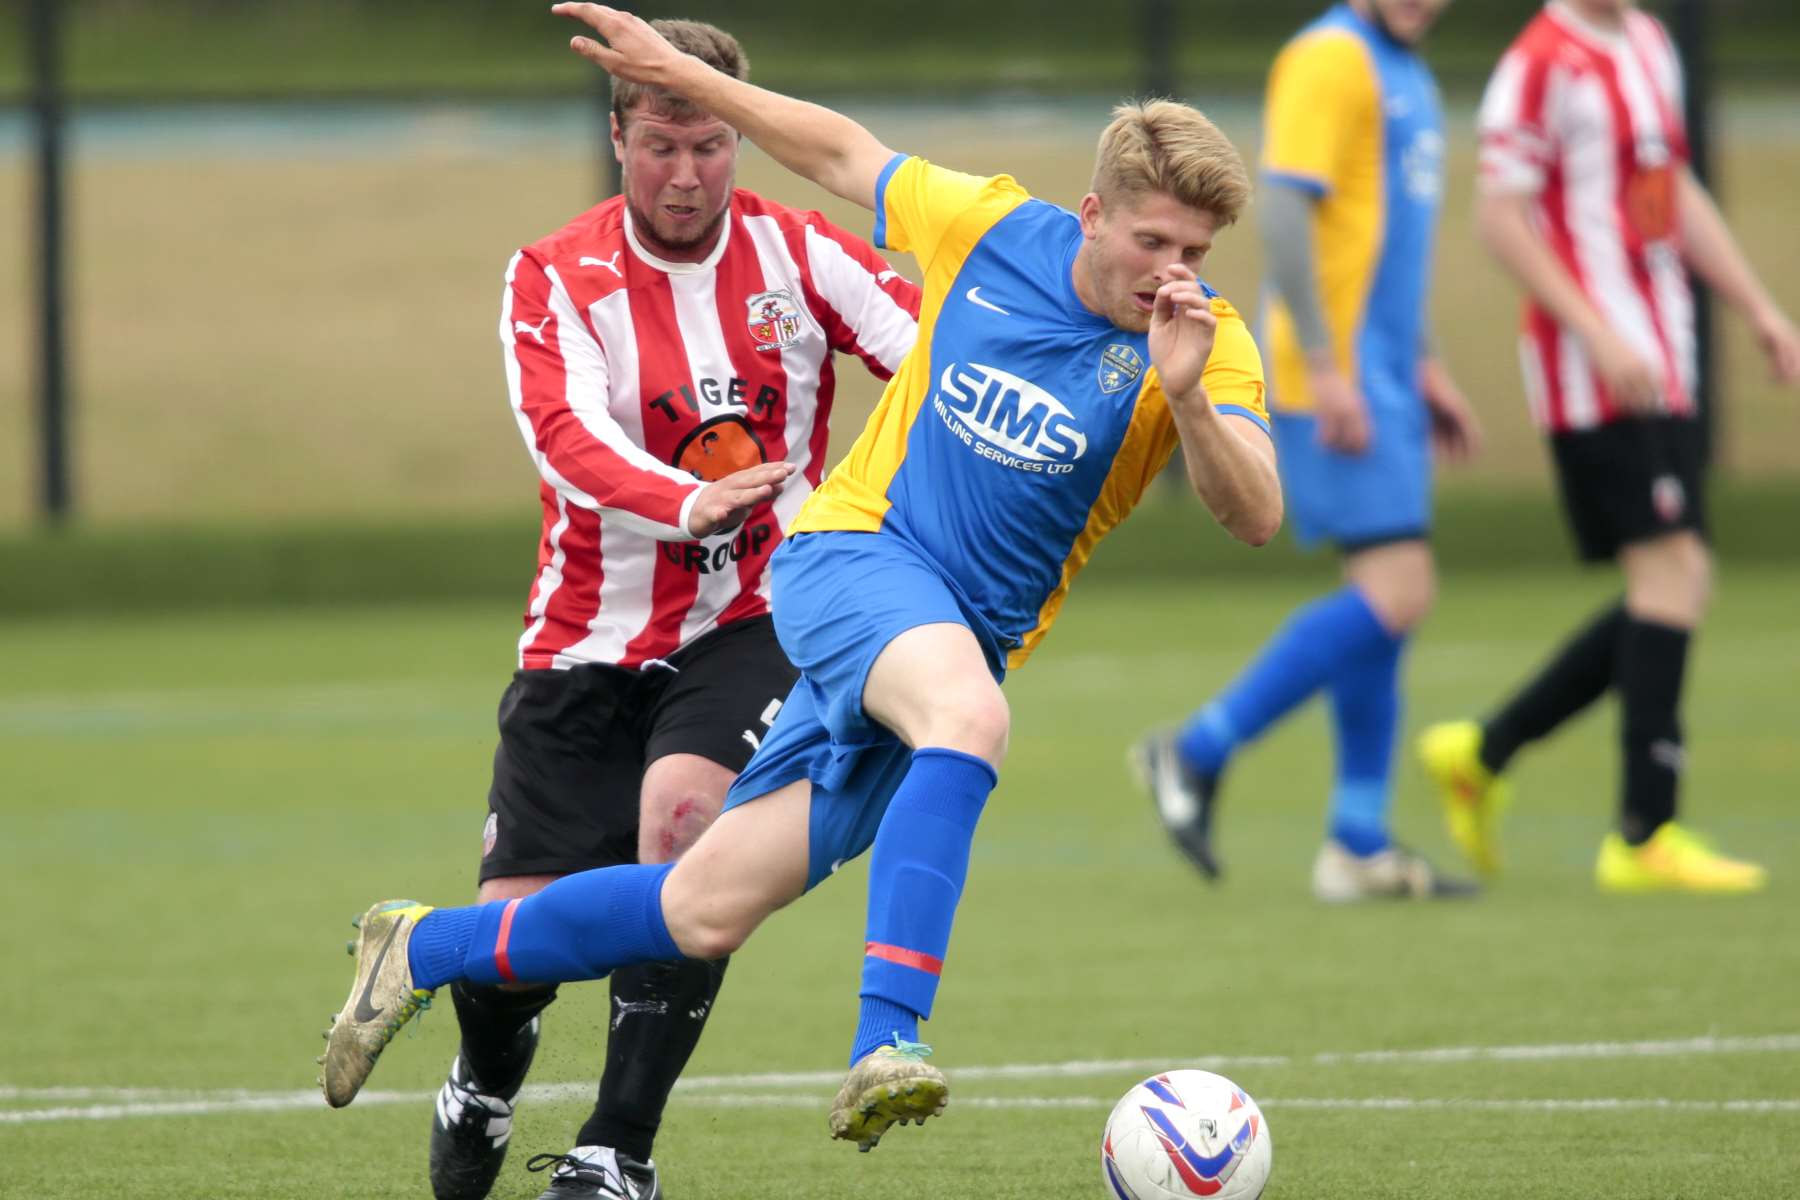 Sheppey United Reserves, stripes, are hoping to end 2014-15 in style Picture: Martin Apps